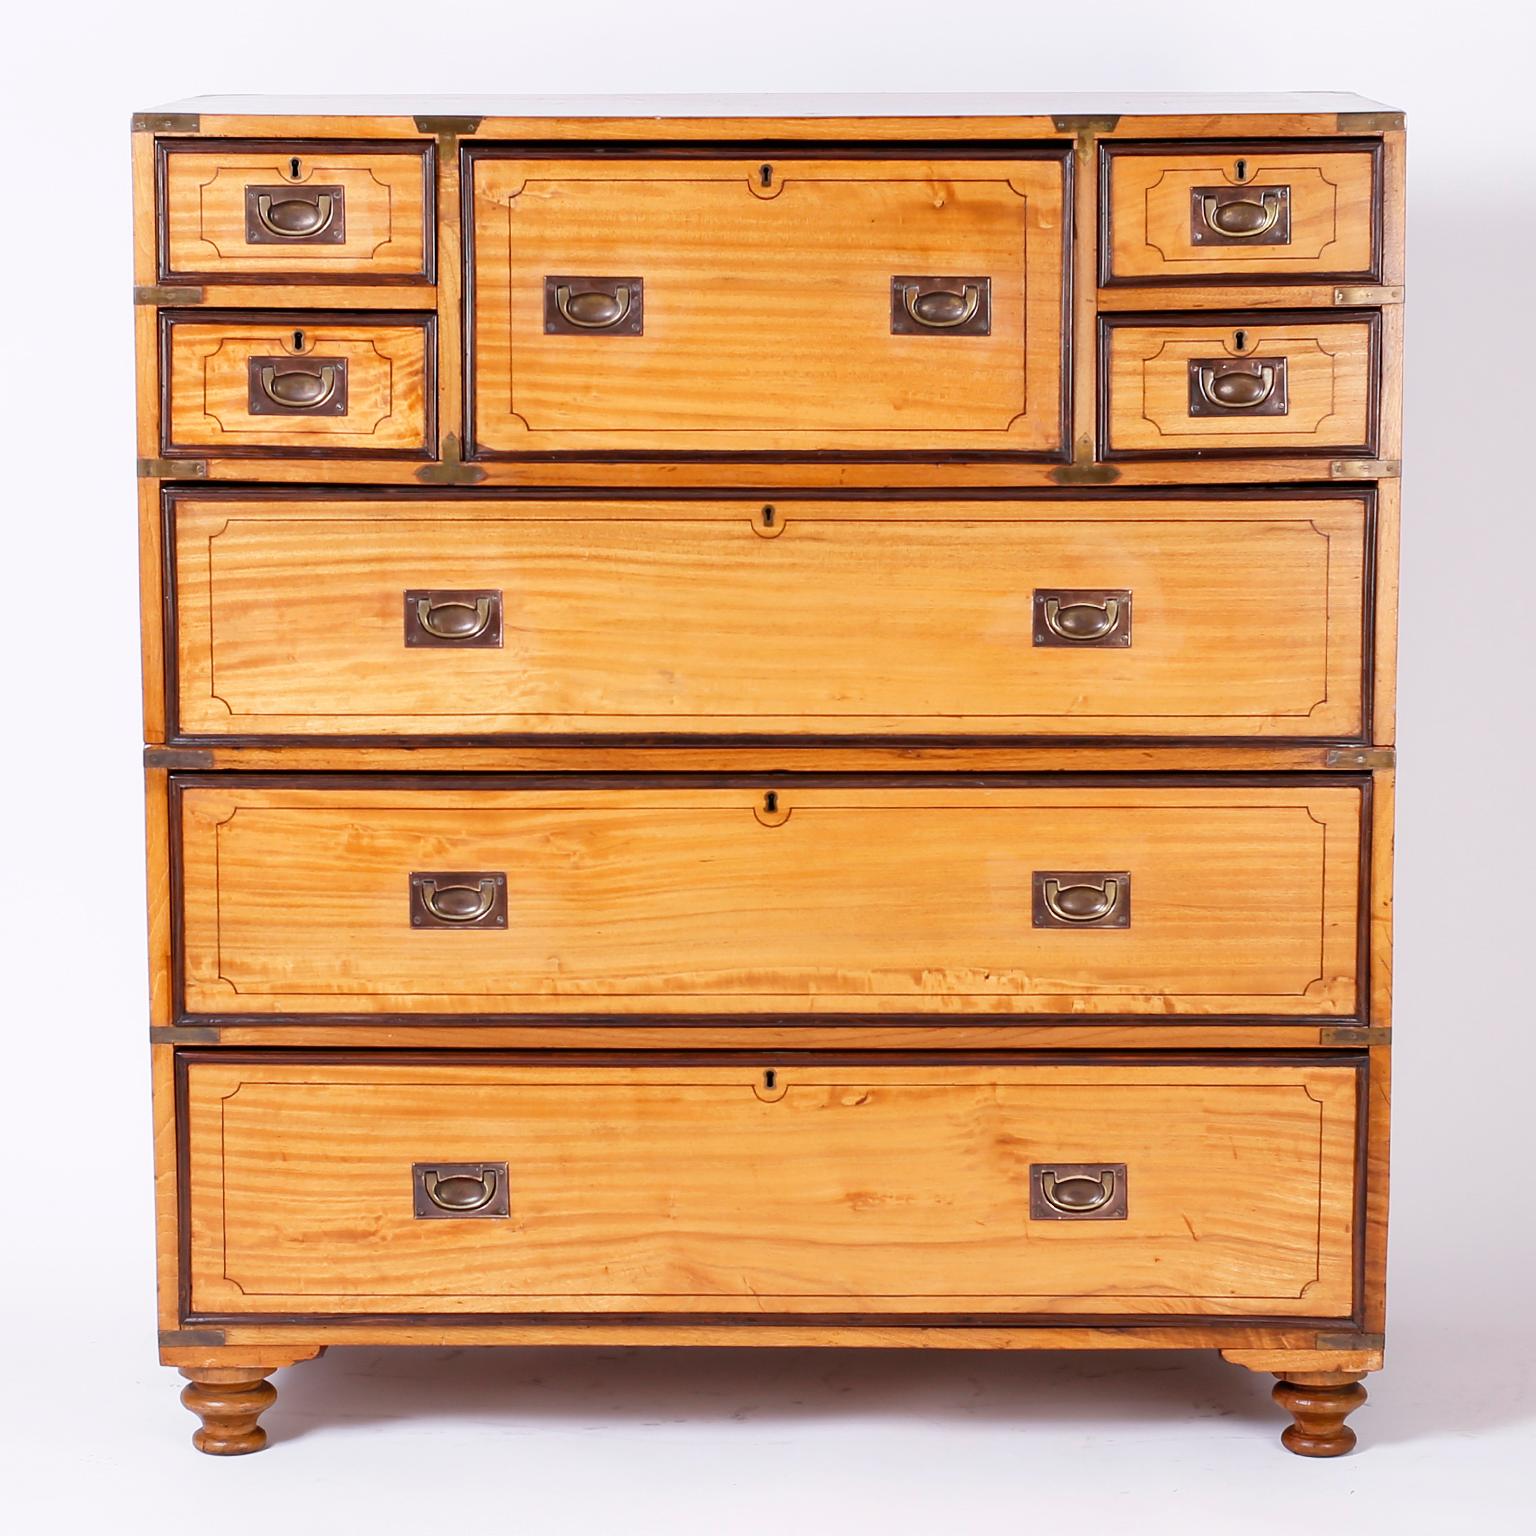 Impressive 19th century campaign chest with seven drawers handcrafted in camphor wood and featuring a pullout desk with nooks, drawers and a leather writing surface.